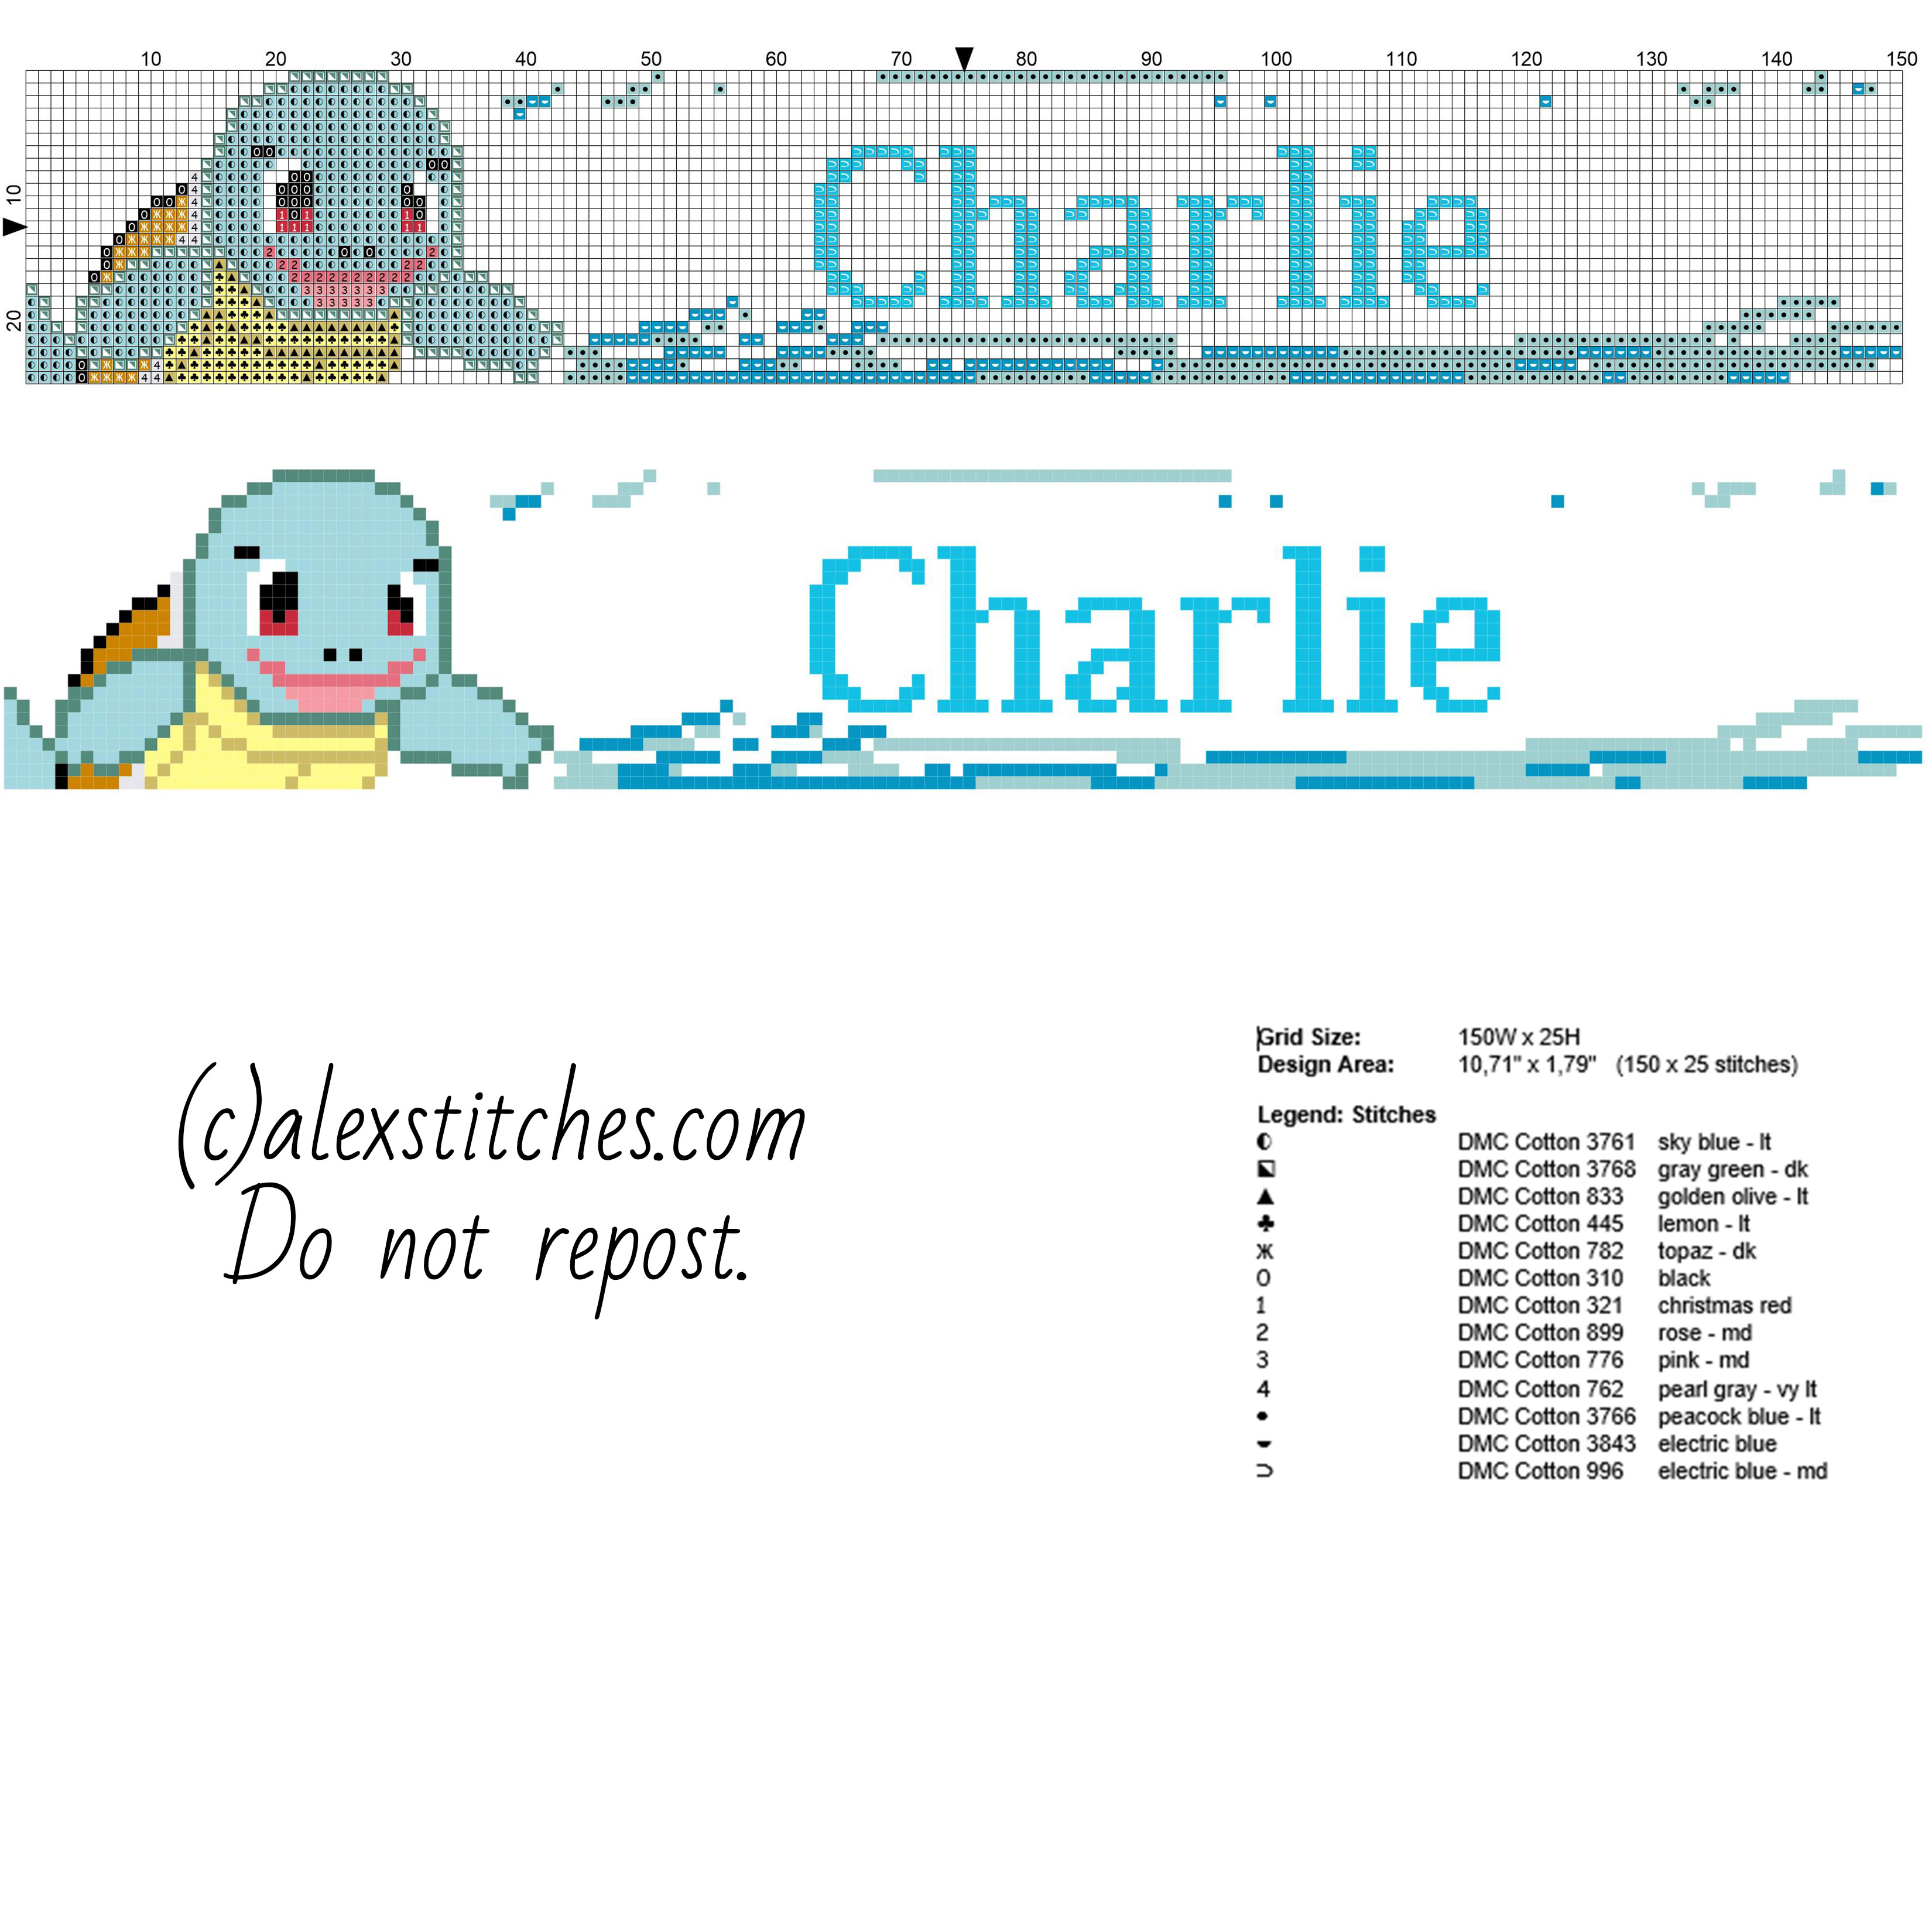 Charlie baby male name with Pokemon Squirtle free cross stitch pattern baby bibs idea